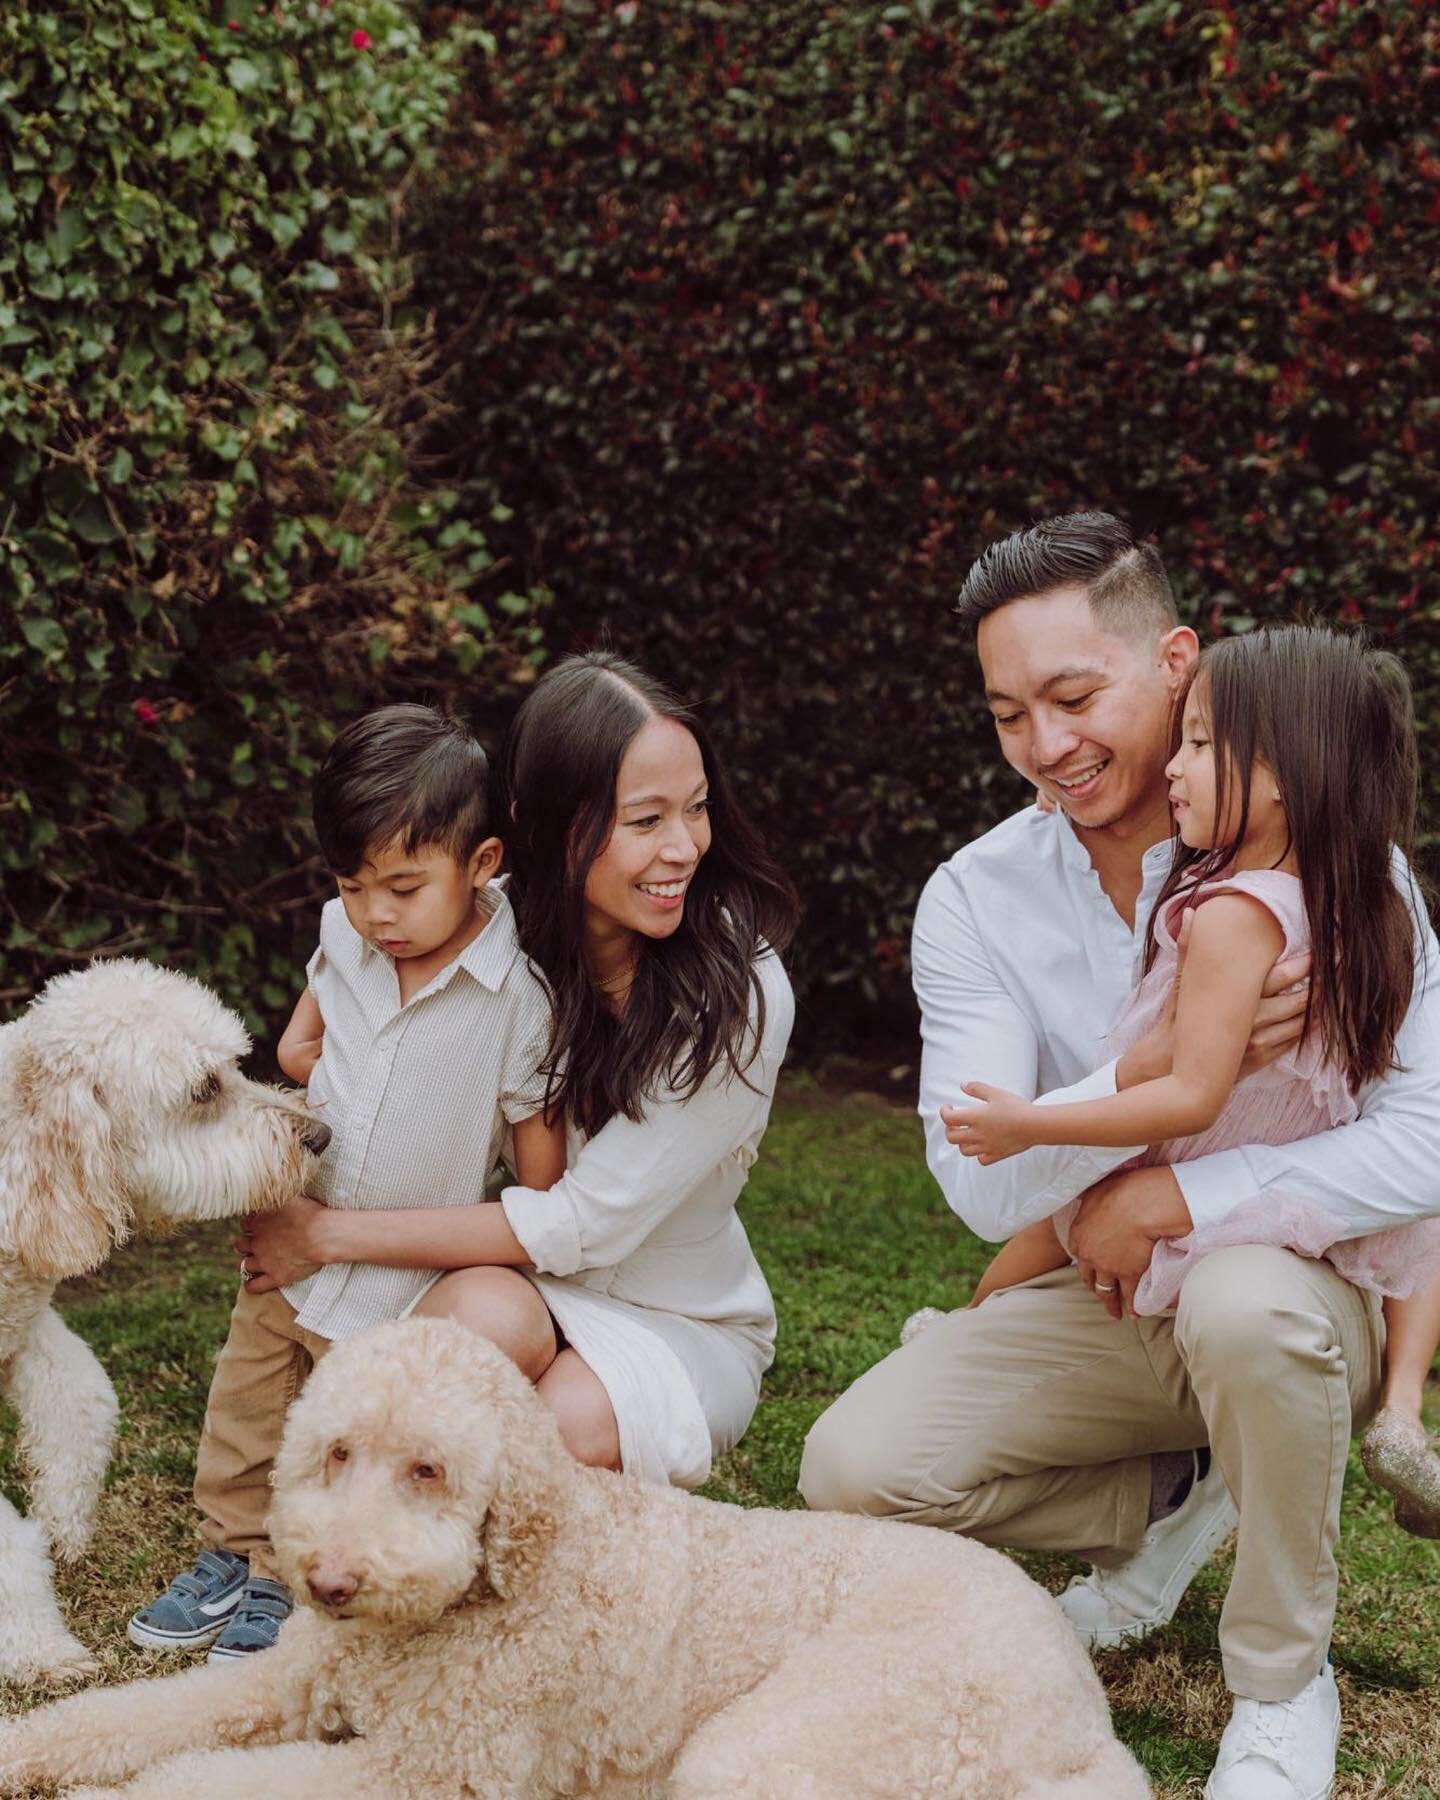 This one&rsquo;s for the doodles 💚

C came to me wanting pictures of her family with her dogs because the doodles are getting older 🥺 the doodles were the couple&rsquo;s original babies and now they&rsquo;ve added two kids to the mix! 

A session w